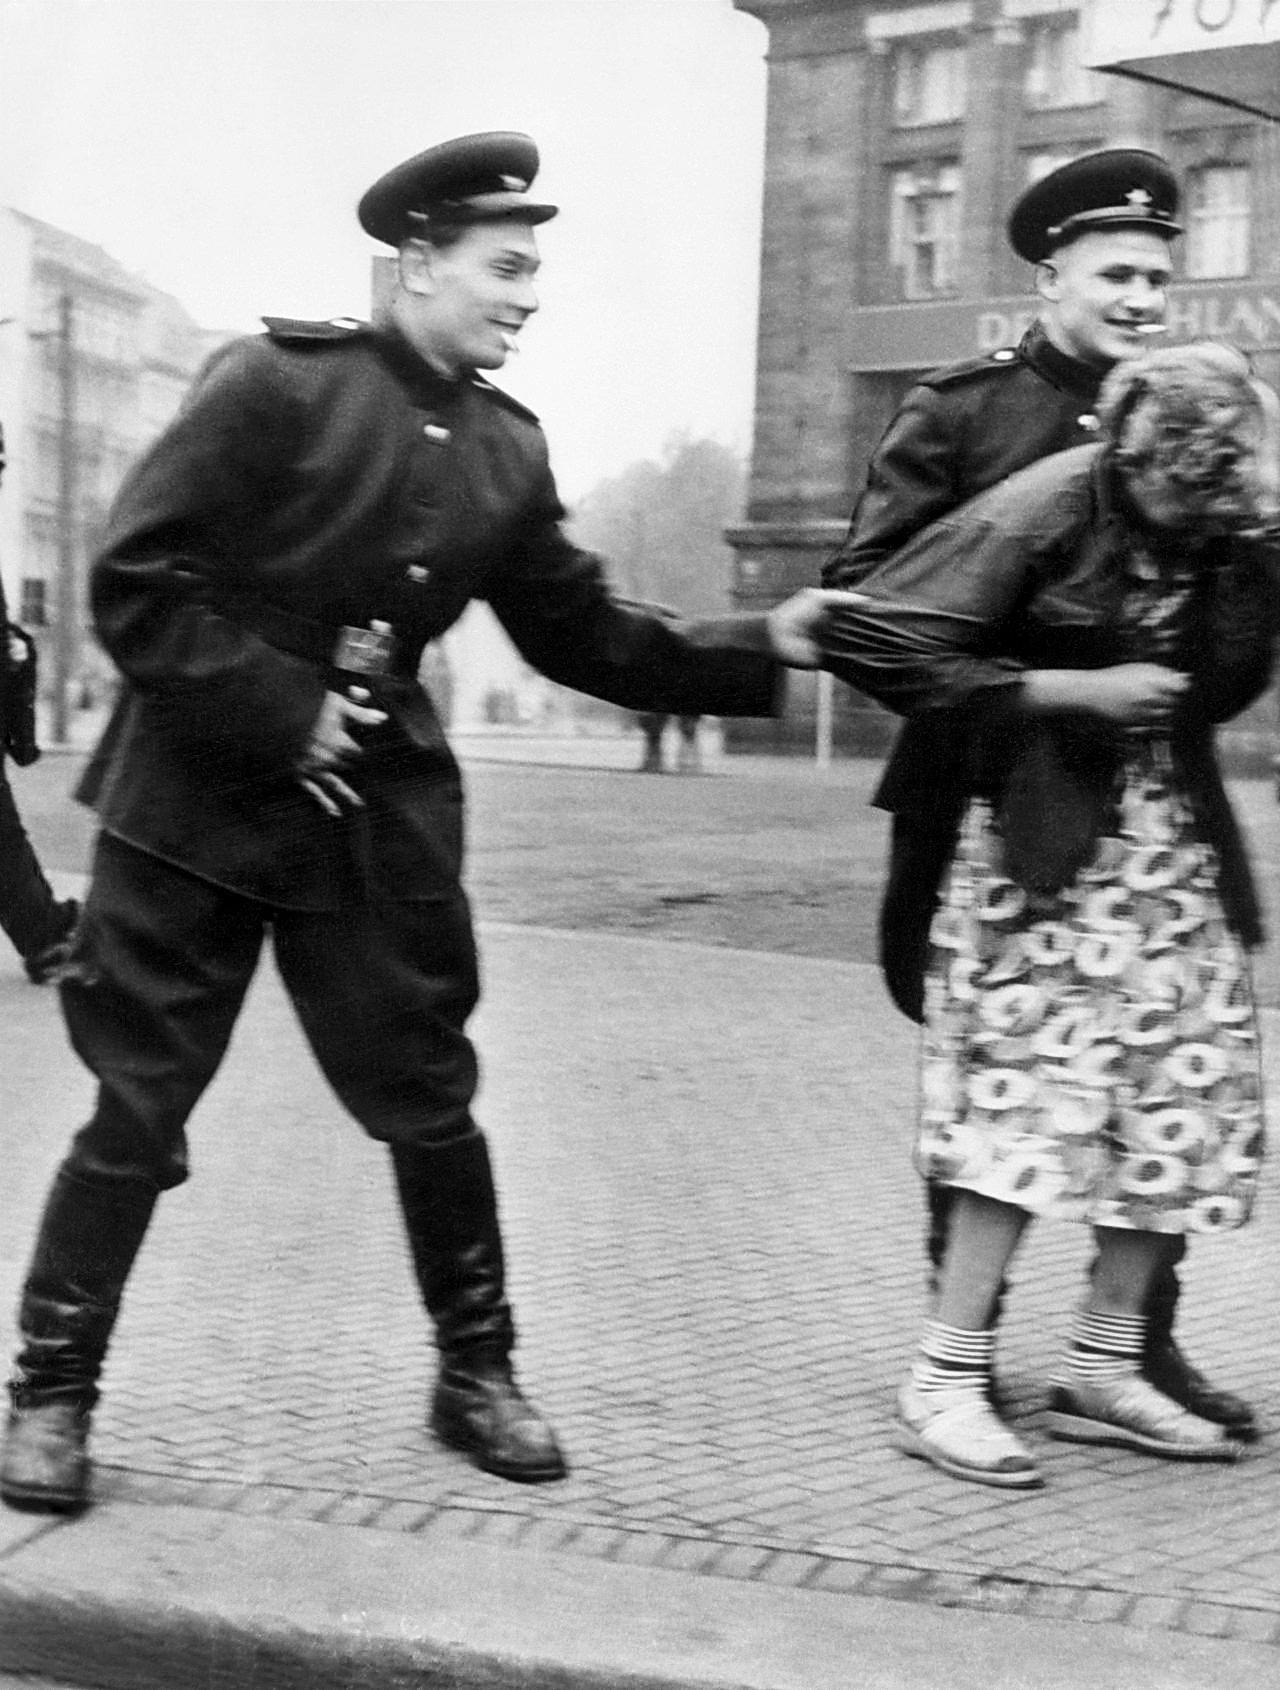 Russian soldiers harass a German girl in Berlin, Germany in 1946. For almost 3 years after the war, it was estimated up to 2 million German women were raped by Russian soldiers. A number of women and children were also killed for no reason during the final stages of the war and even afterwards. The occupying Russian Army had almost a blank check to do what they wanted to the German people once they occupied East Germany. Finally, the Russian higher ups took control of the situation, and even severely punished rapist by 1950.